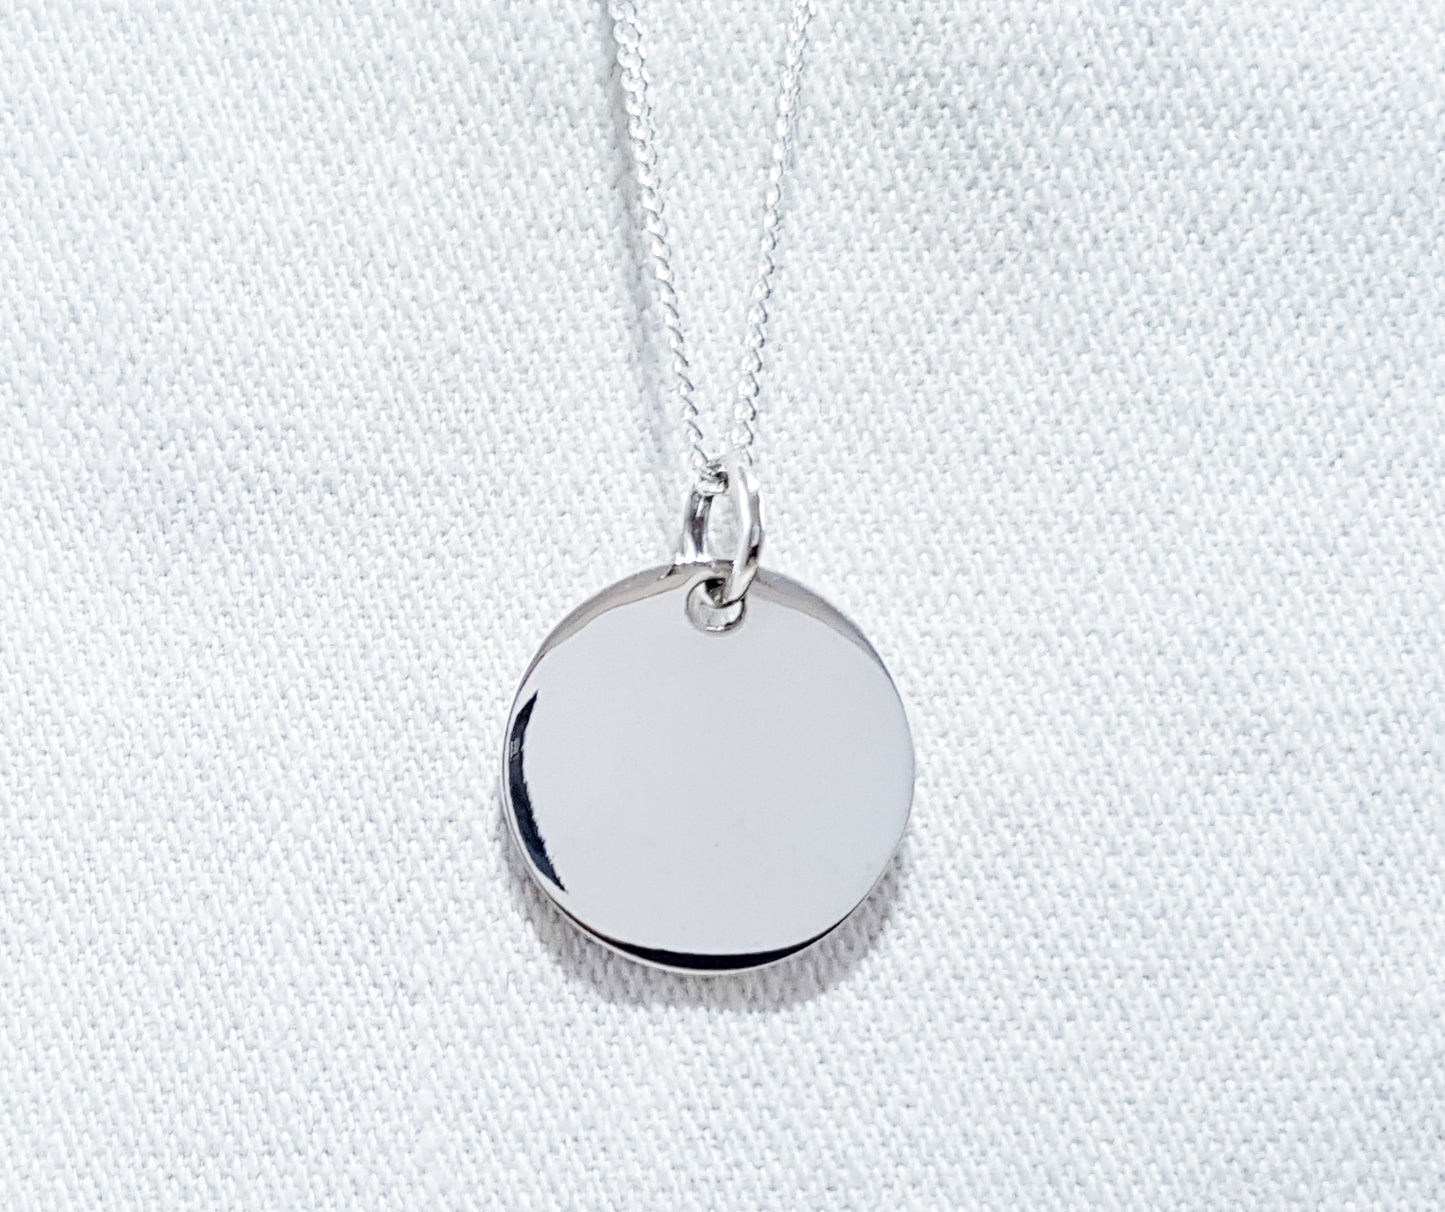 A medium-sized round disc pendant, simple yet stylish in design. The pendant features a smooth and polished circular shape, creating a clean and contemporary look. 